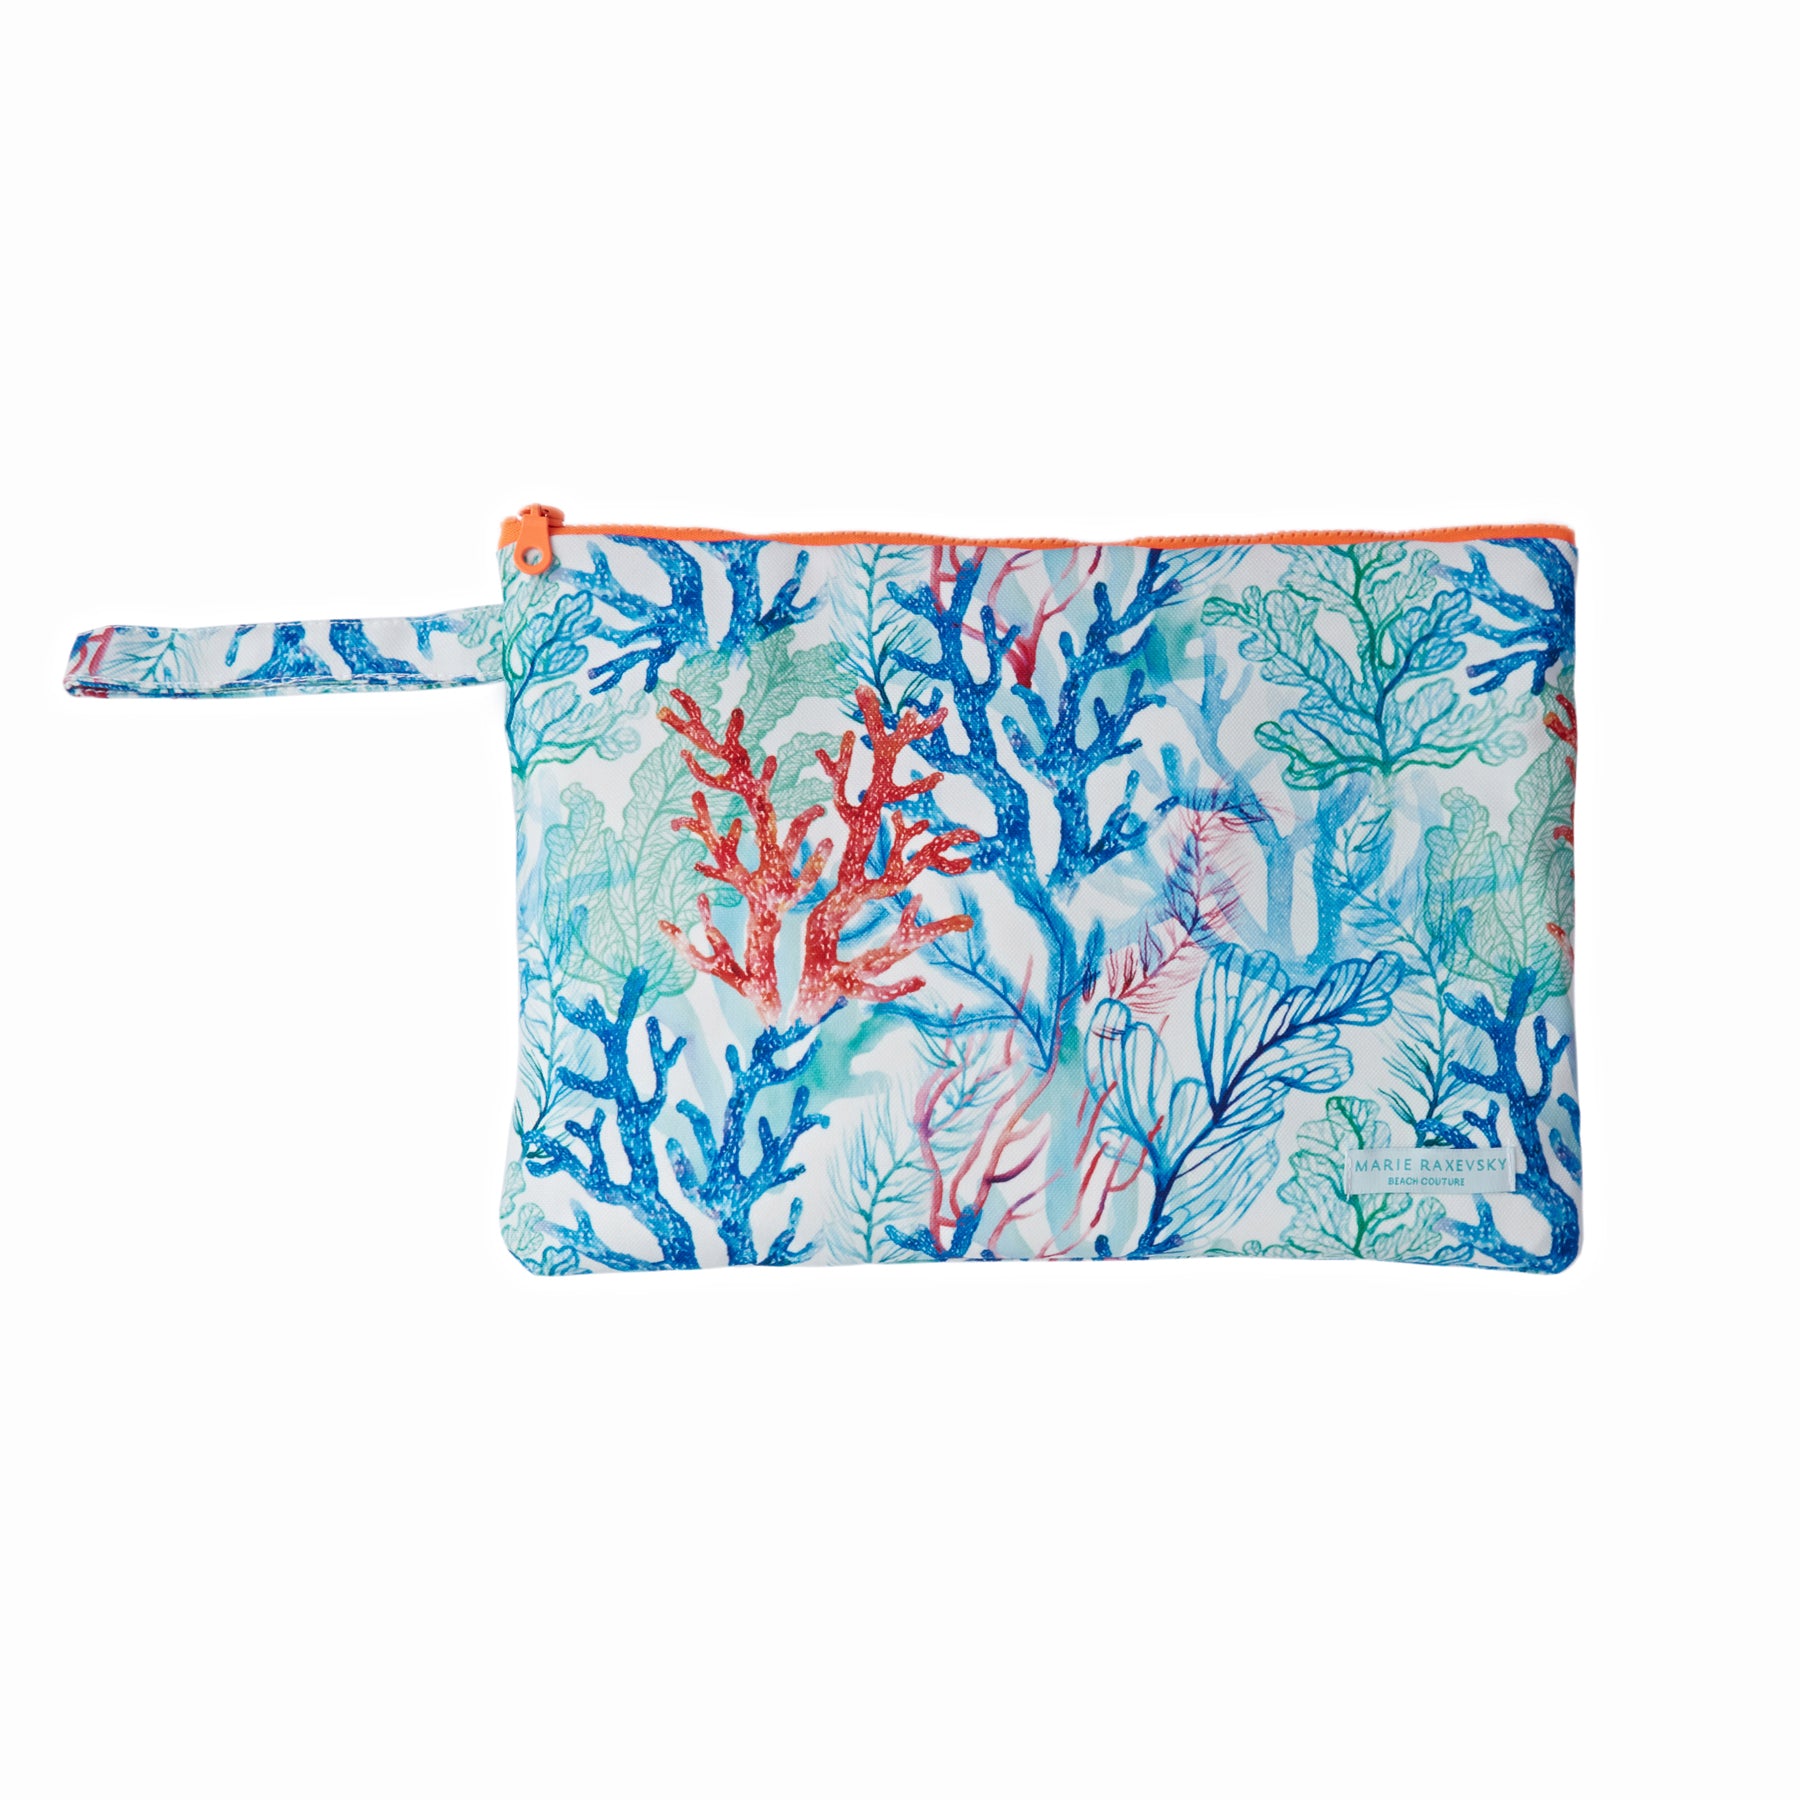 Our collection of waterproof small pouches with measurements 18x25 cm, match our swimwear and beachwear pieces and are the ultimate super stylish summer accessories. Decorated in our signature colorful prints, these pouches are perfect for storing your essentials while at the beach and accessorizing your outfits during sunny morning strolls or island night strolls. This one is decorated in our corals print in orange, green and blue hues and features a neon orange zipper. 
